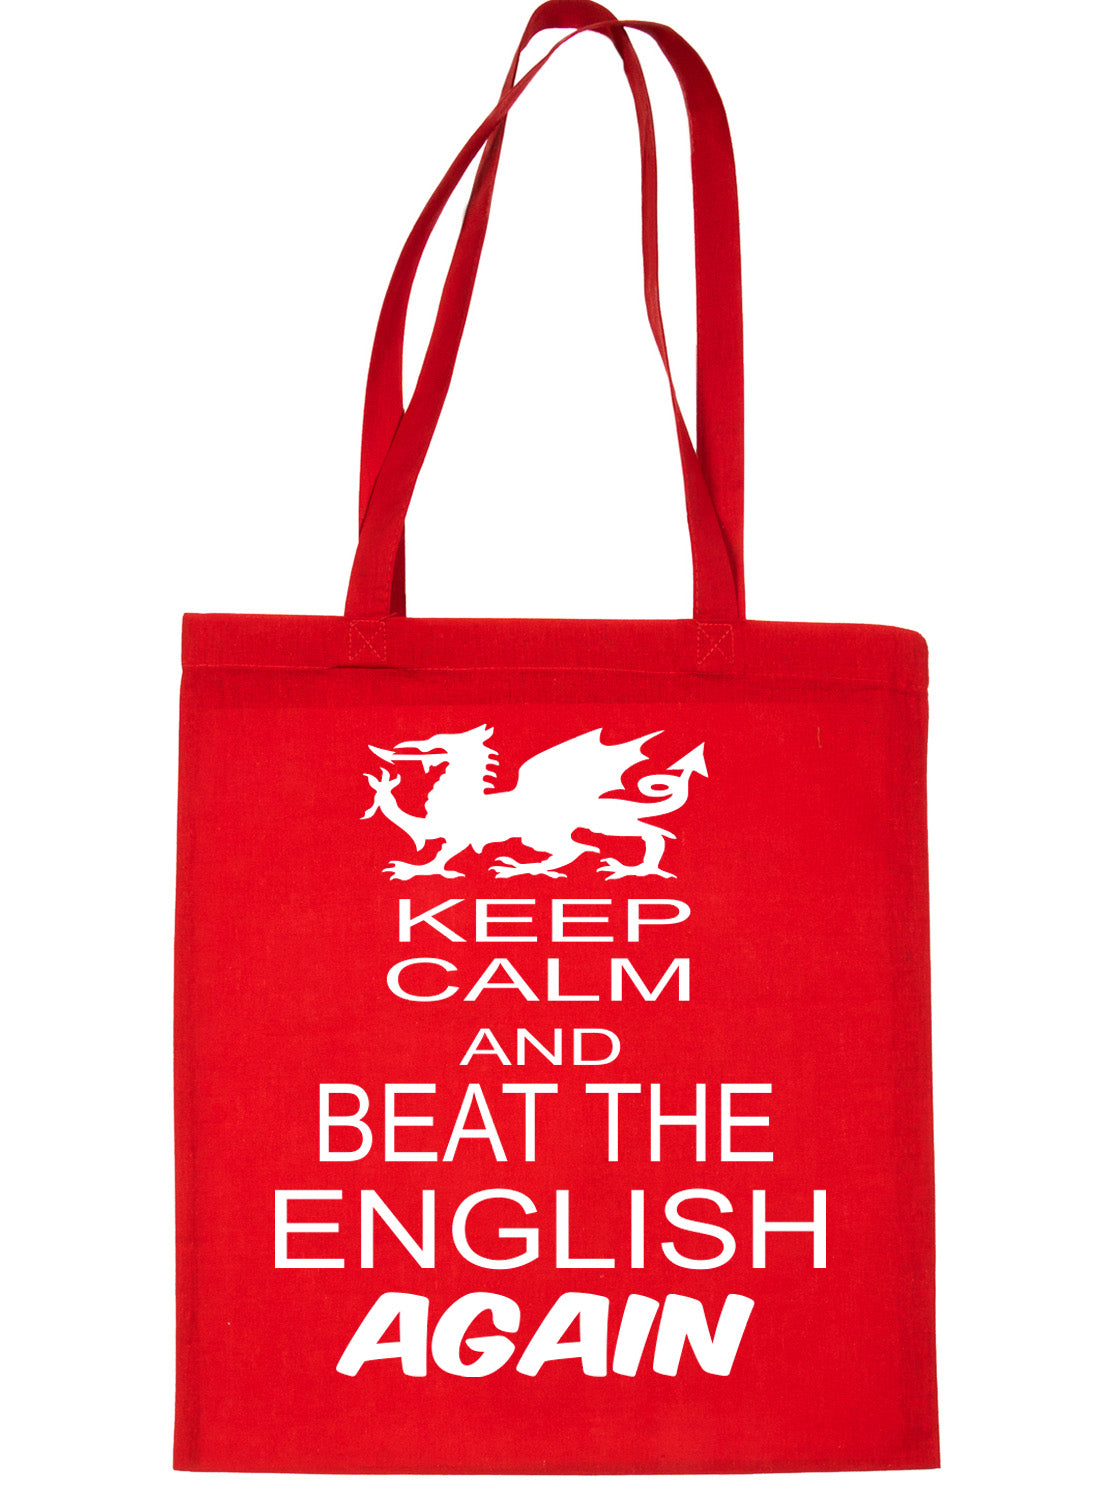 Welsh Rugby Beat The English 6 Nations Shopping Tote Bag Ladies Gift